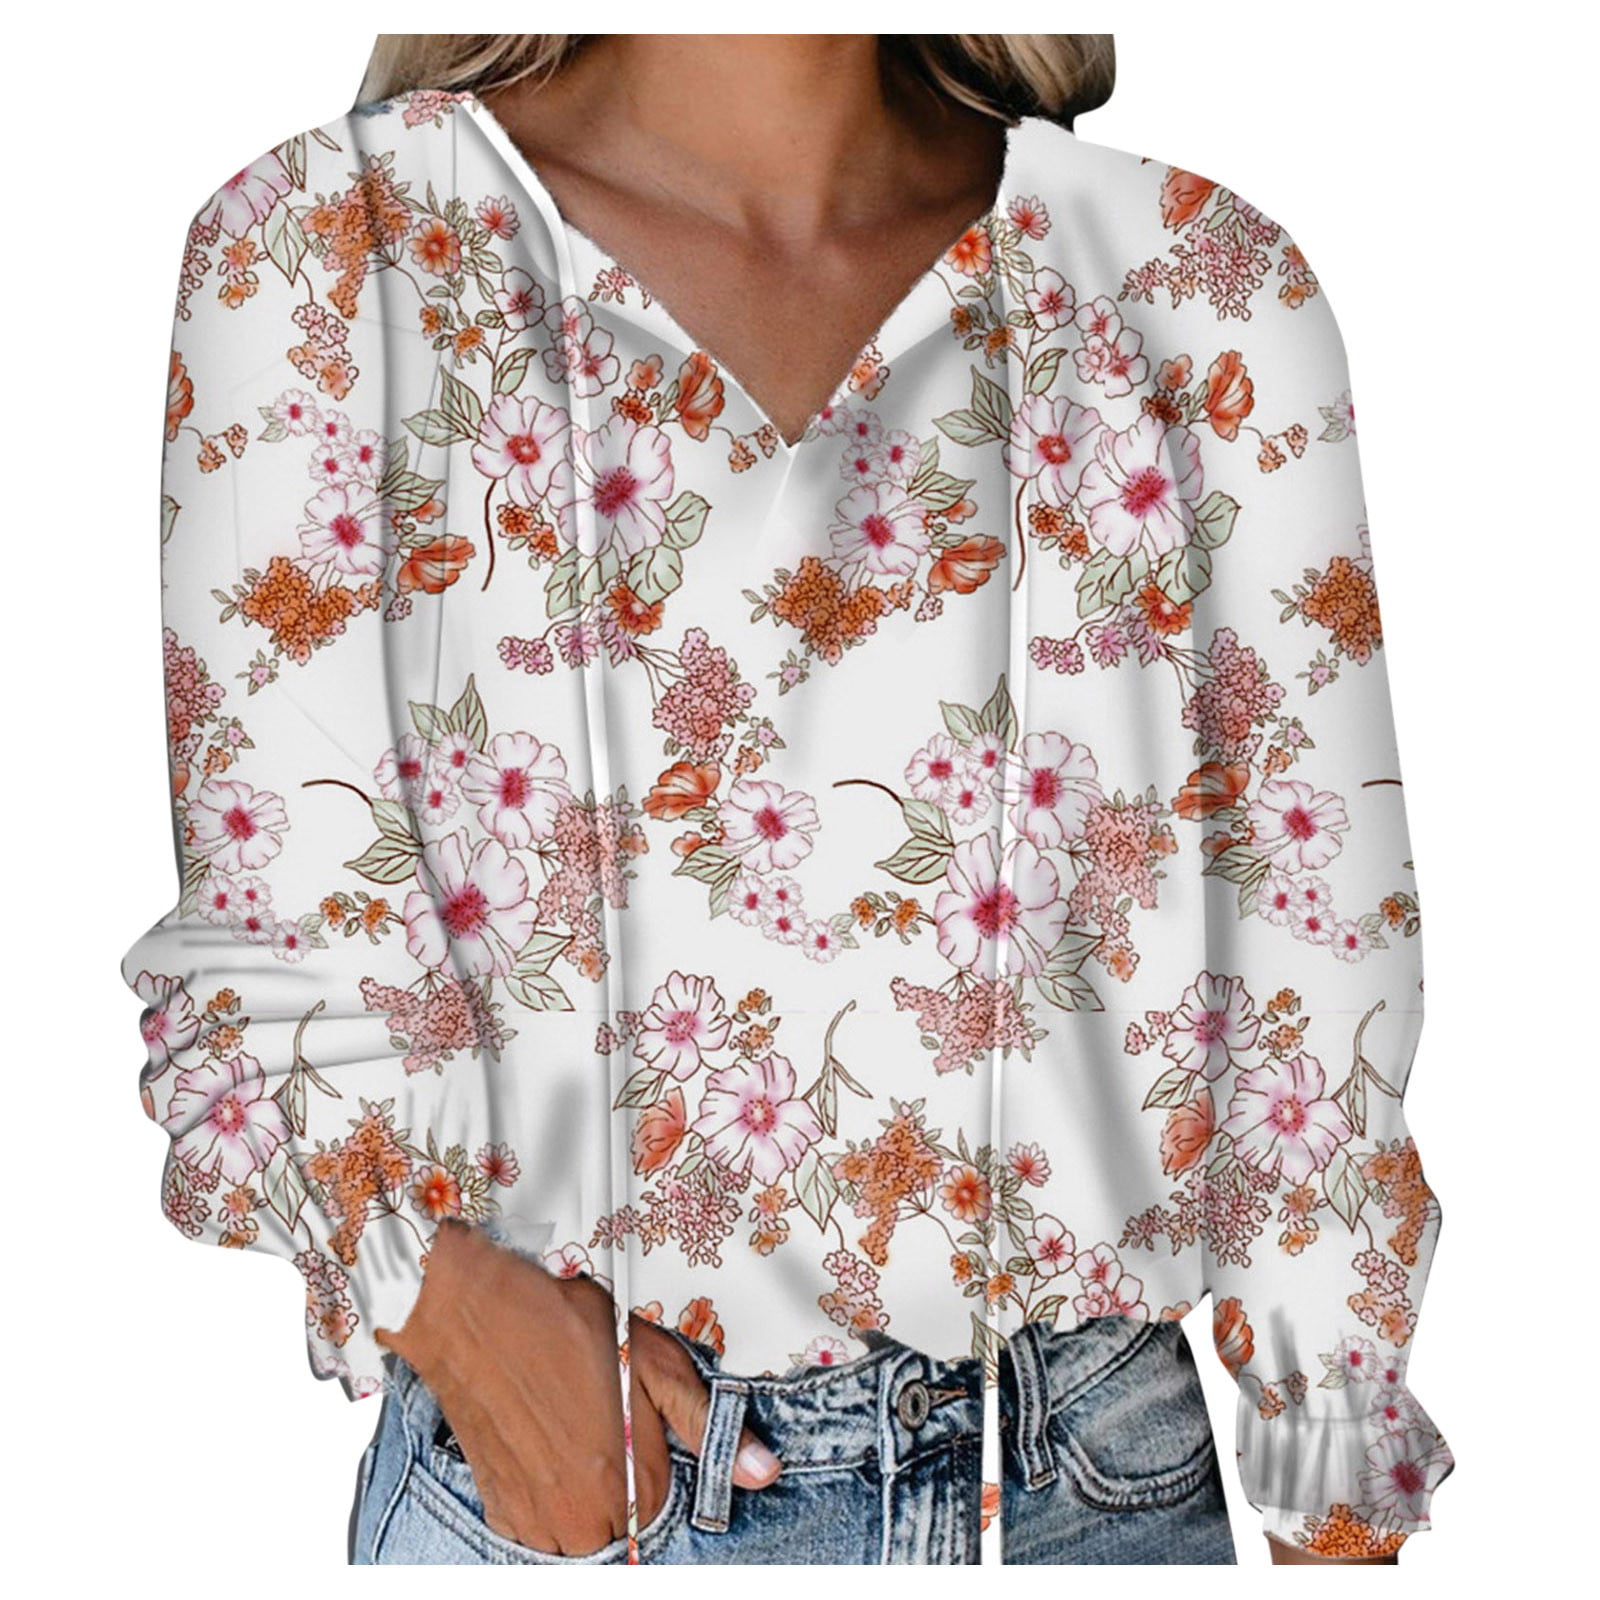 Women Floral V-Neck T-Shirt Long Sleeve Casual Tops Baggy Summer Shirts Blouse 